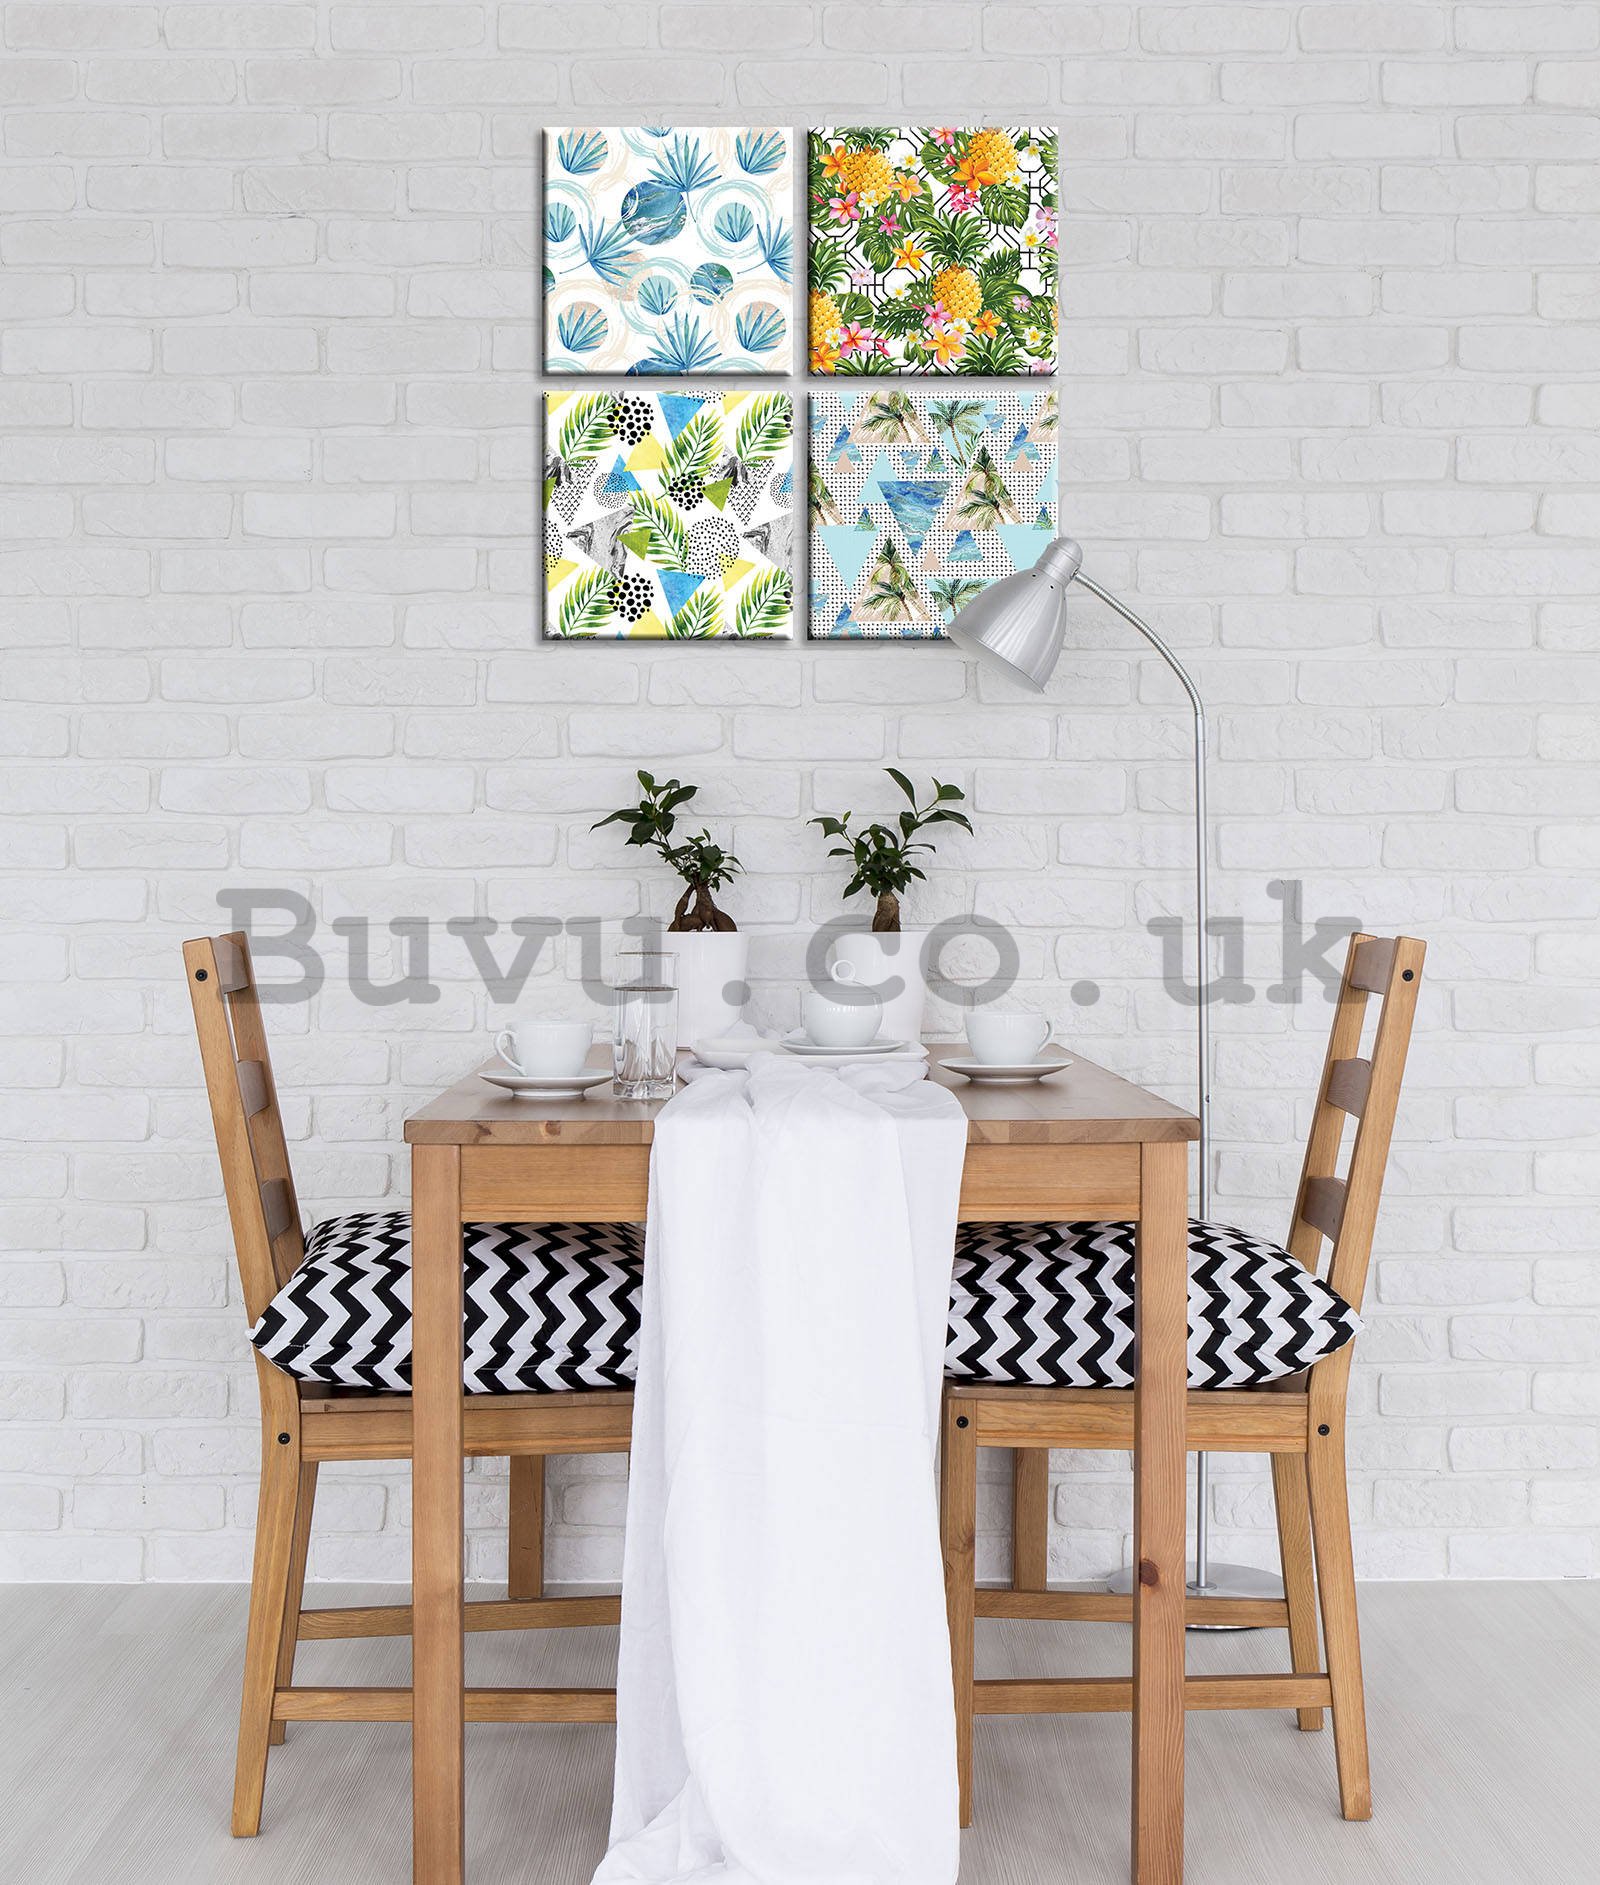 Painting on canvas: Painted floral abstraction (1) - set 4pcs 25x25cm